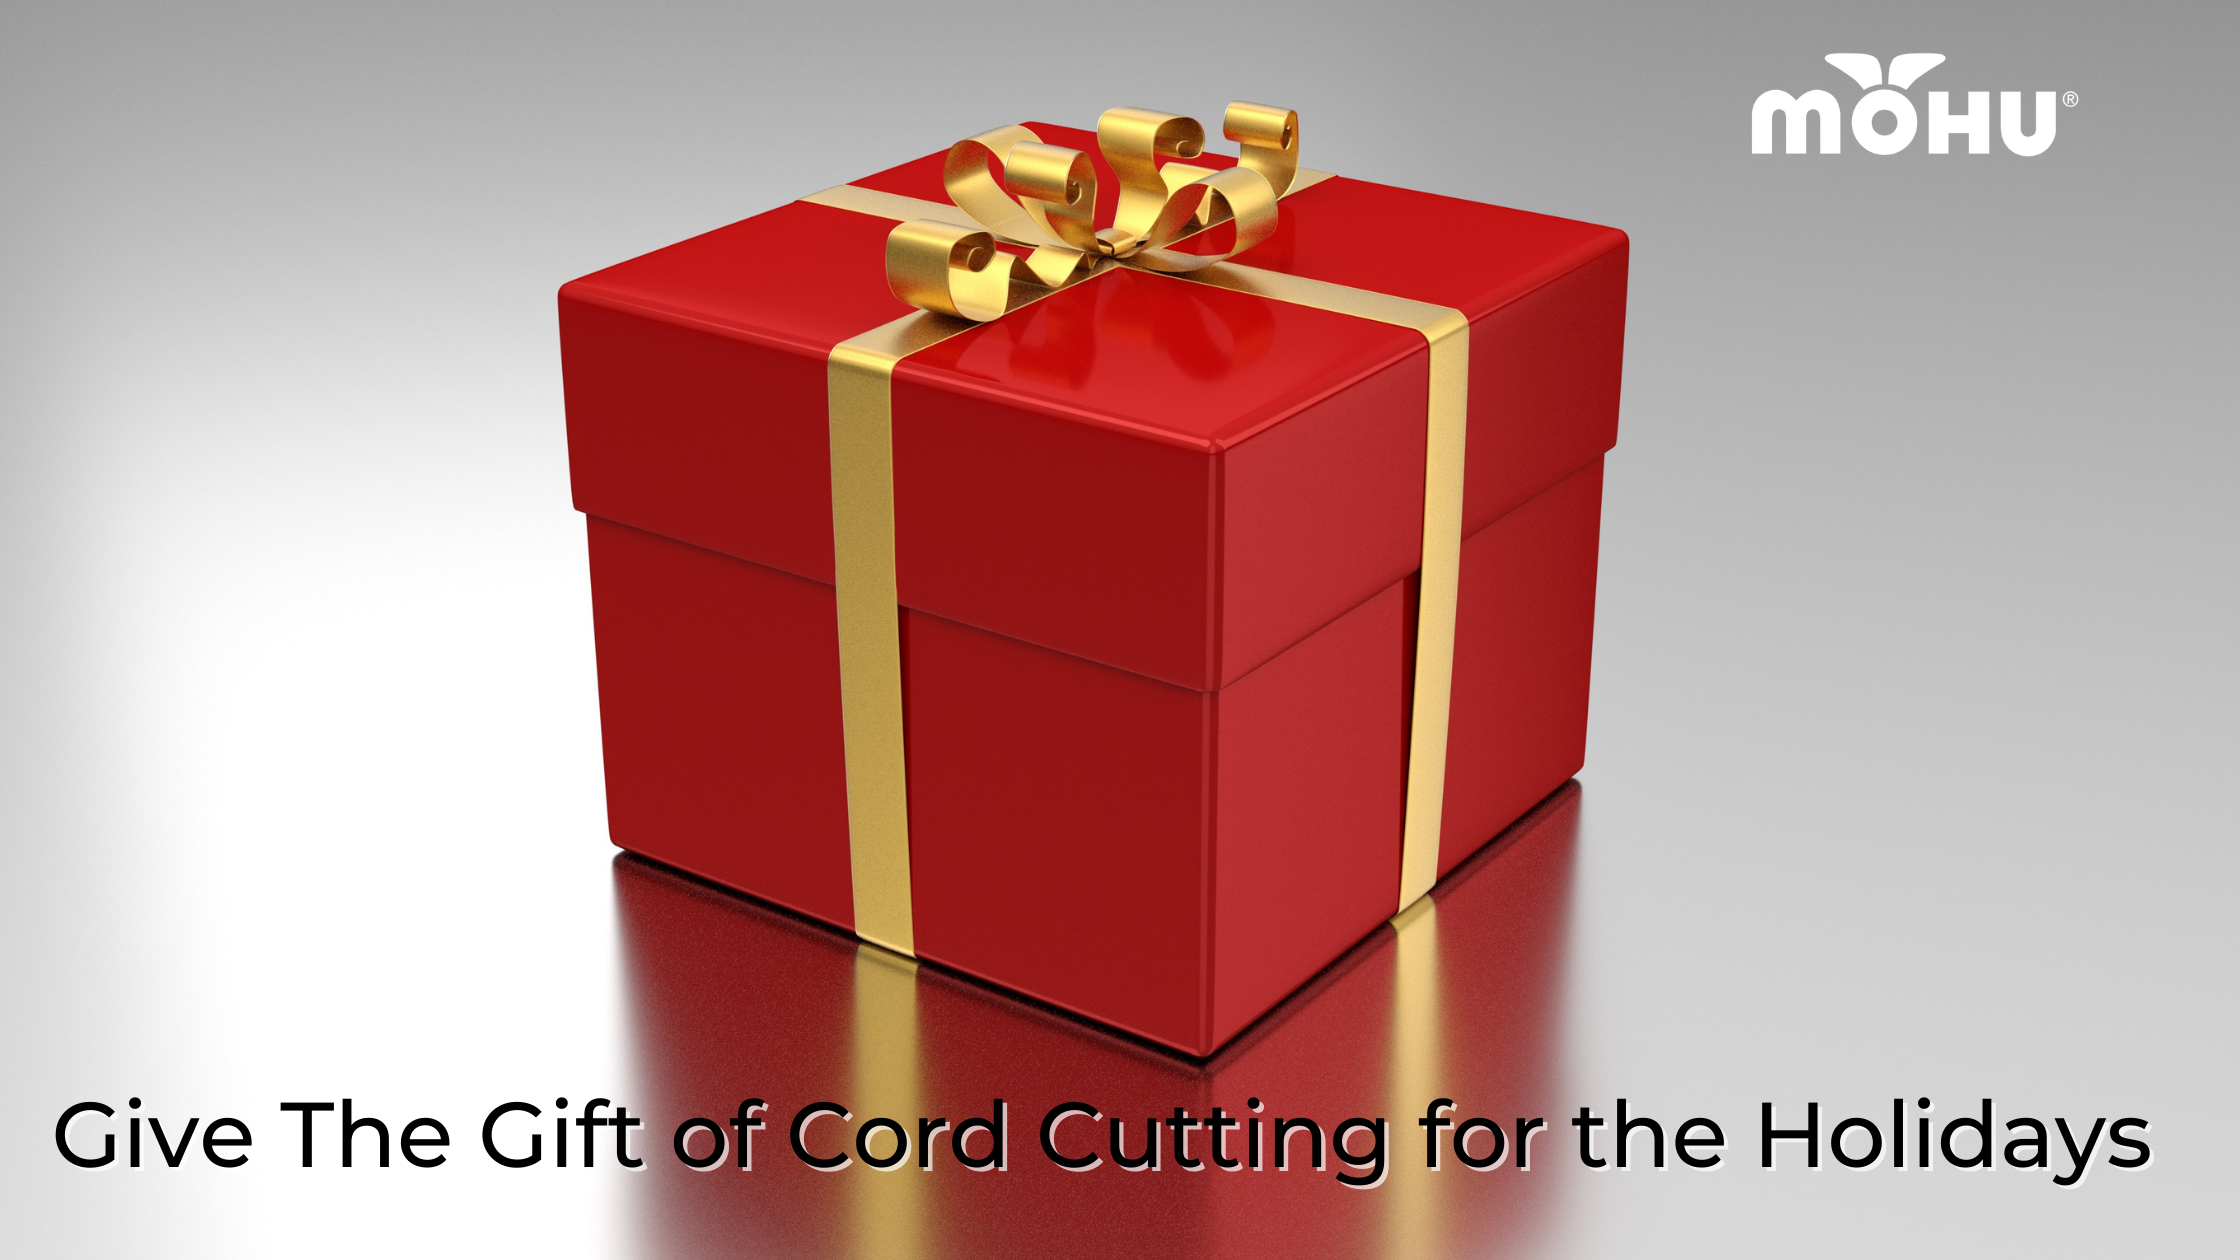 Image of a gift box on a table, Give The Gift of Cord Cutting for the Holidays, Mohu logo